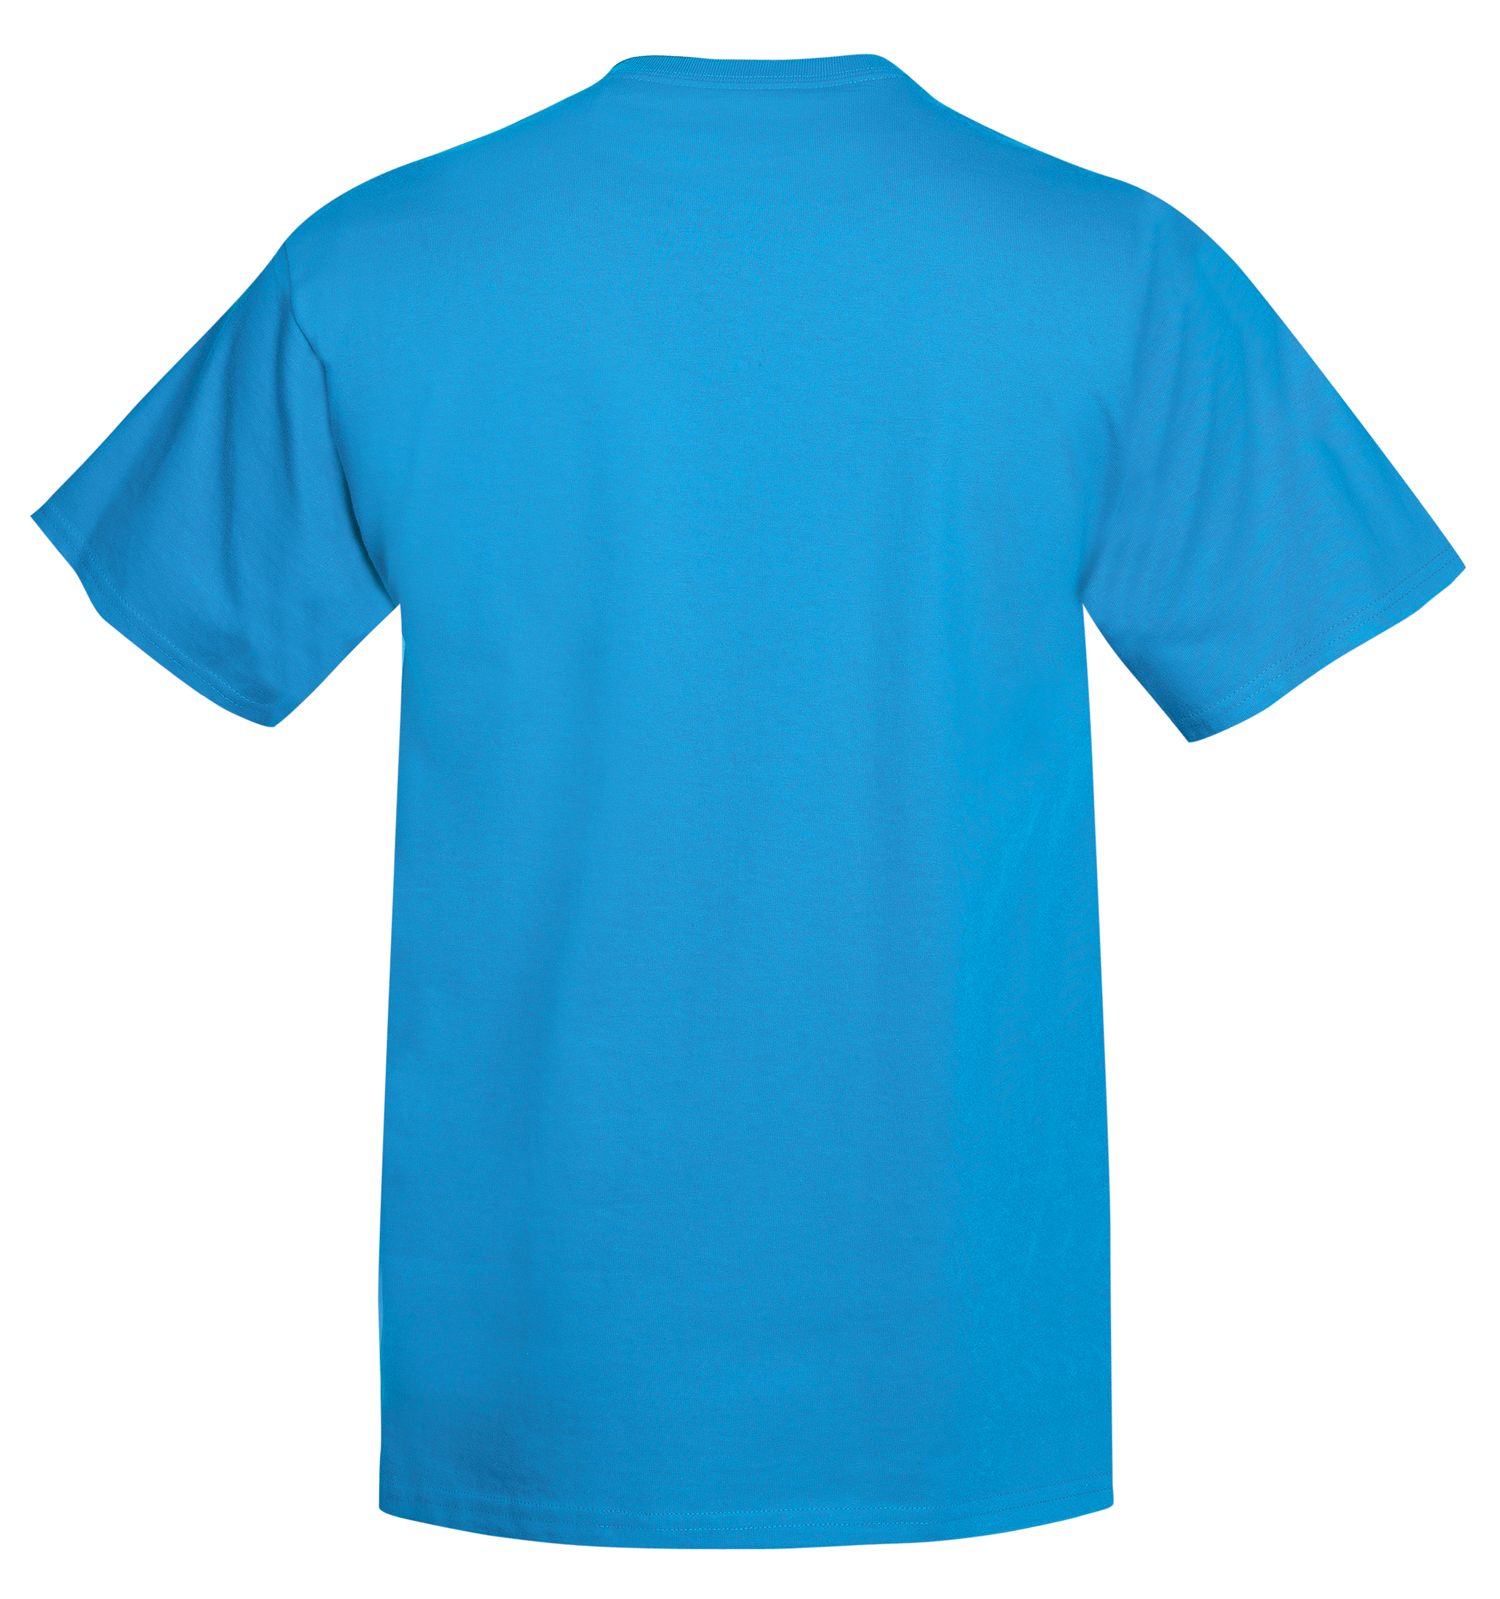 t shirt clipart front and back - photo #40